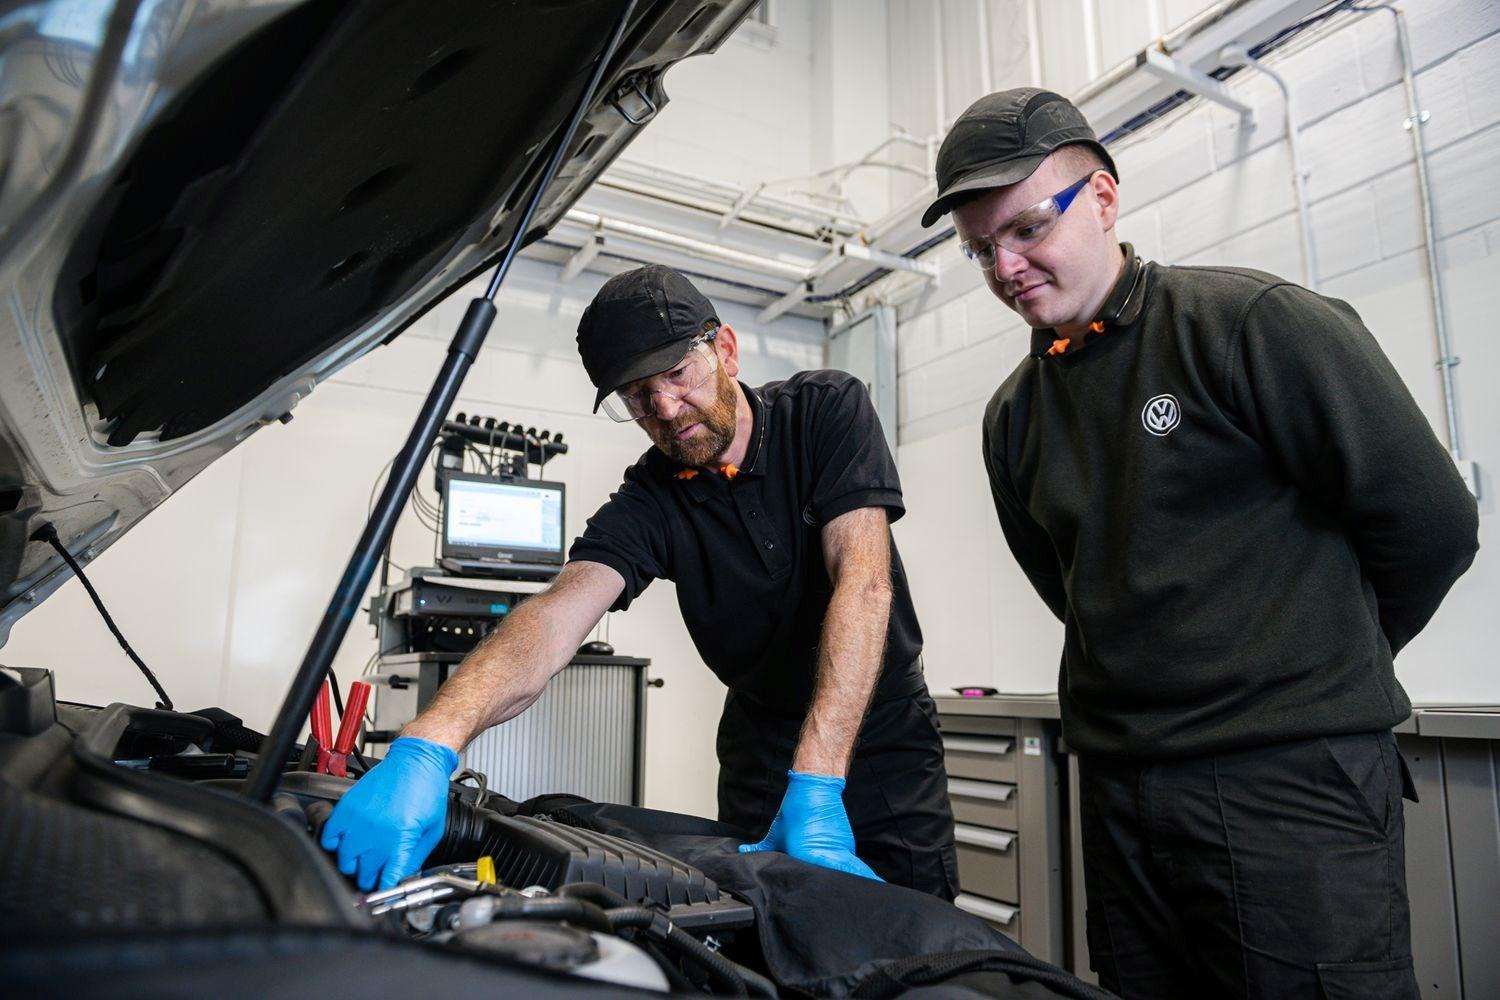 Two Volkswagen Repair Specialists inspect under the hood of a Volkswagen Golf during routine maintenance at Volkswagen Approved Accident Repair Centre, Agnew Volkswagen Belfast